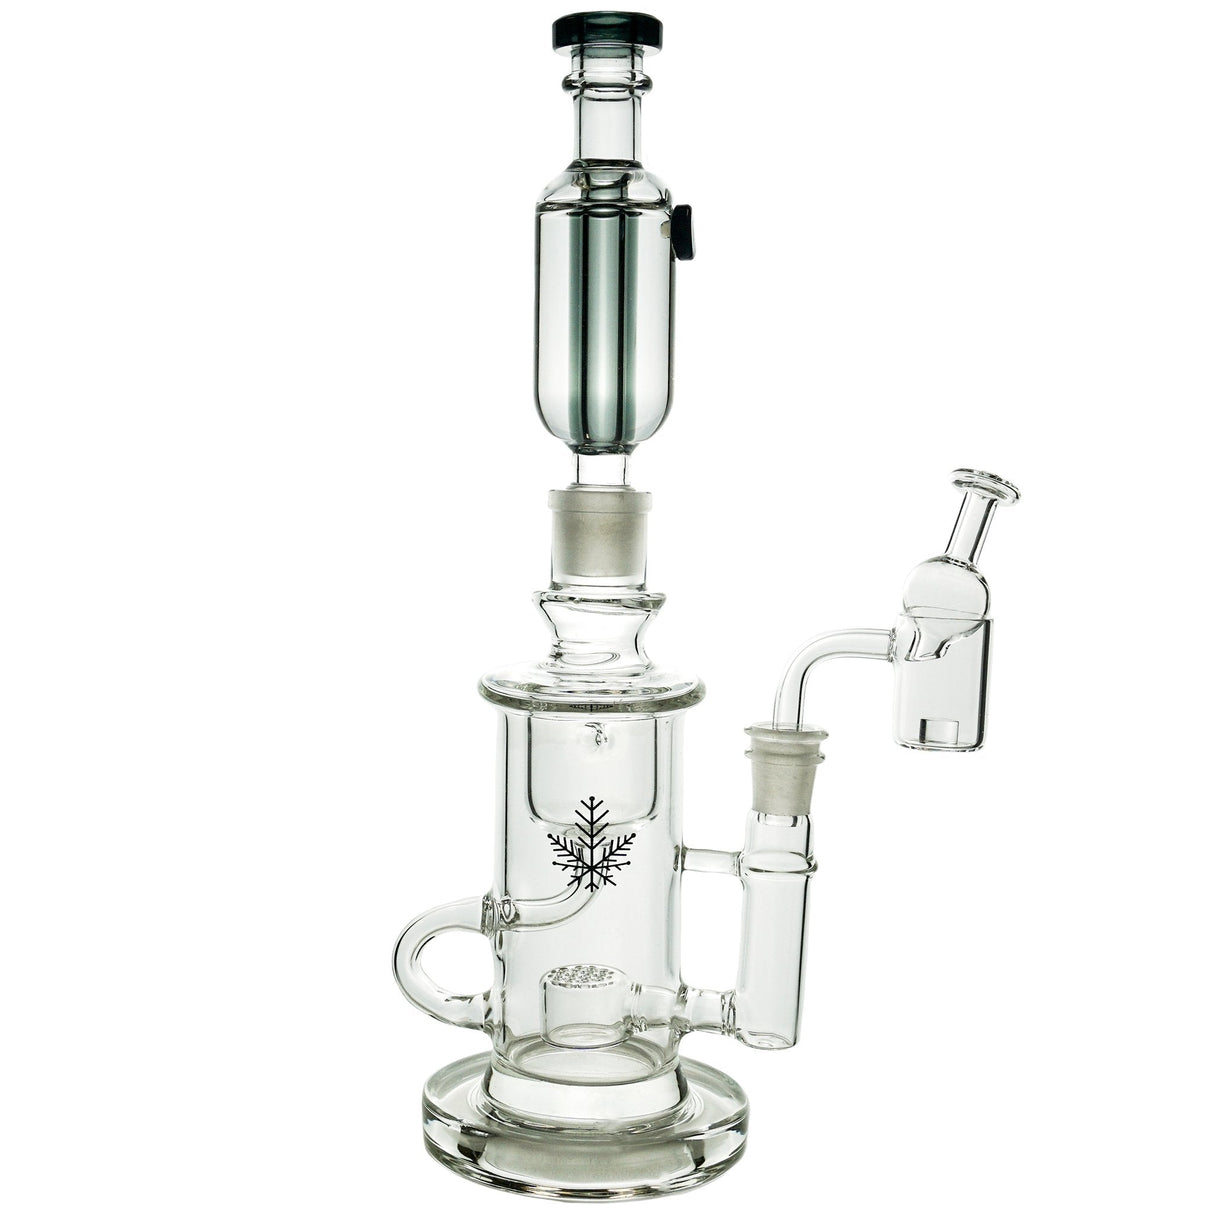 Freeze Pipe Klein Recycler dab rig with quartz banger, clear glass, and intricate percolator design